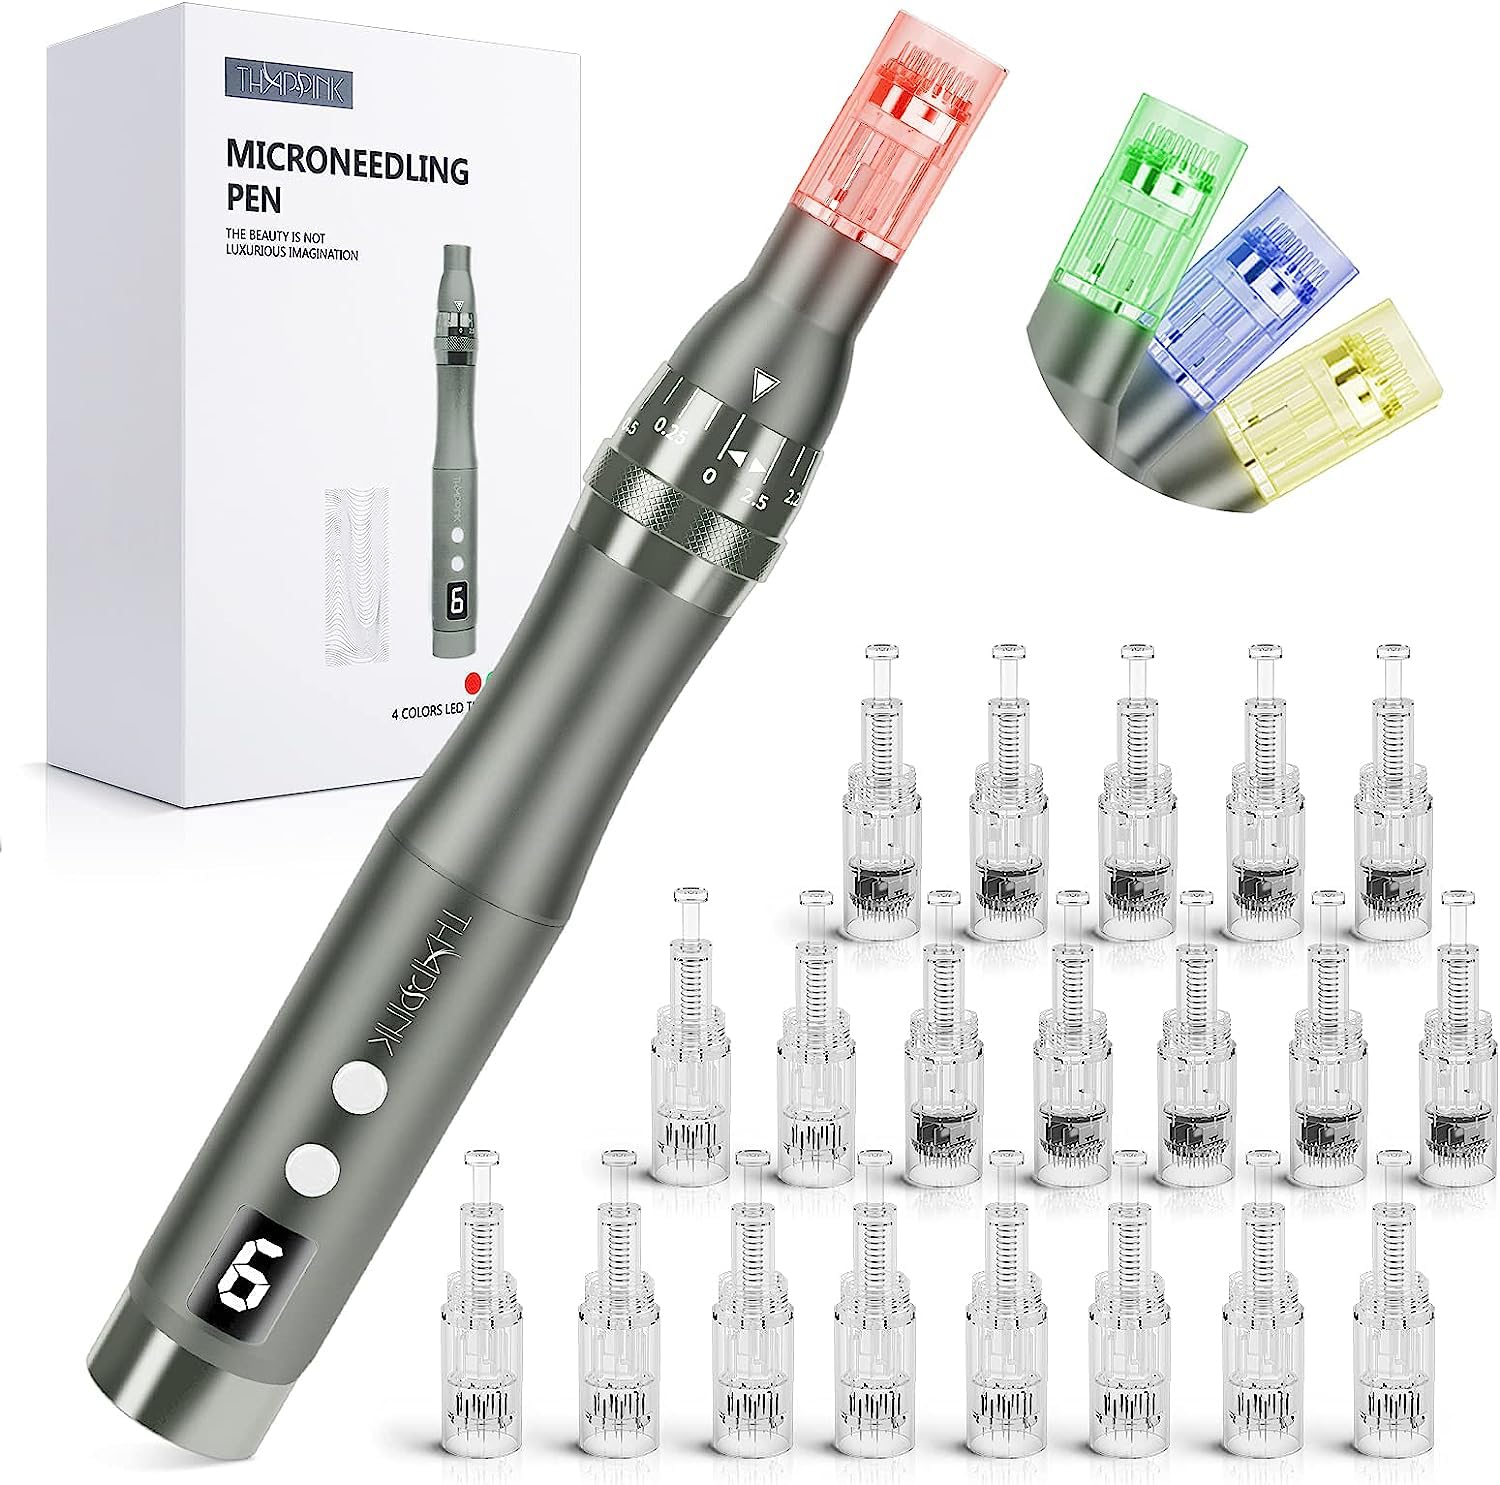 microneedling pen at home